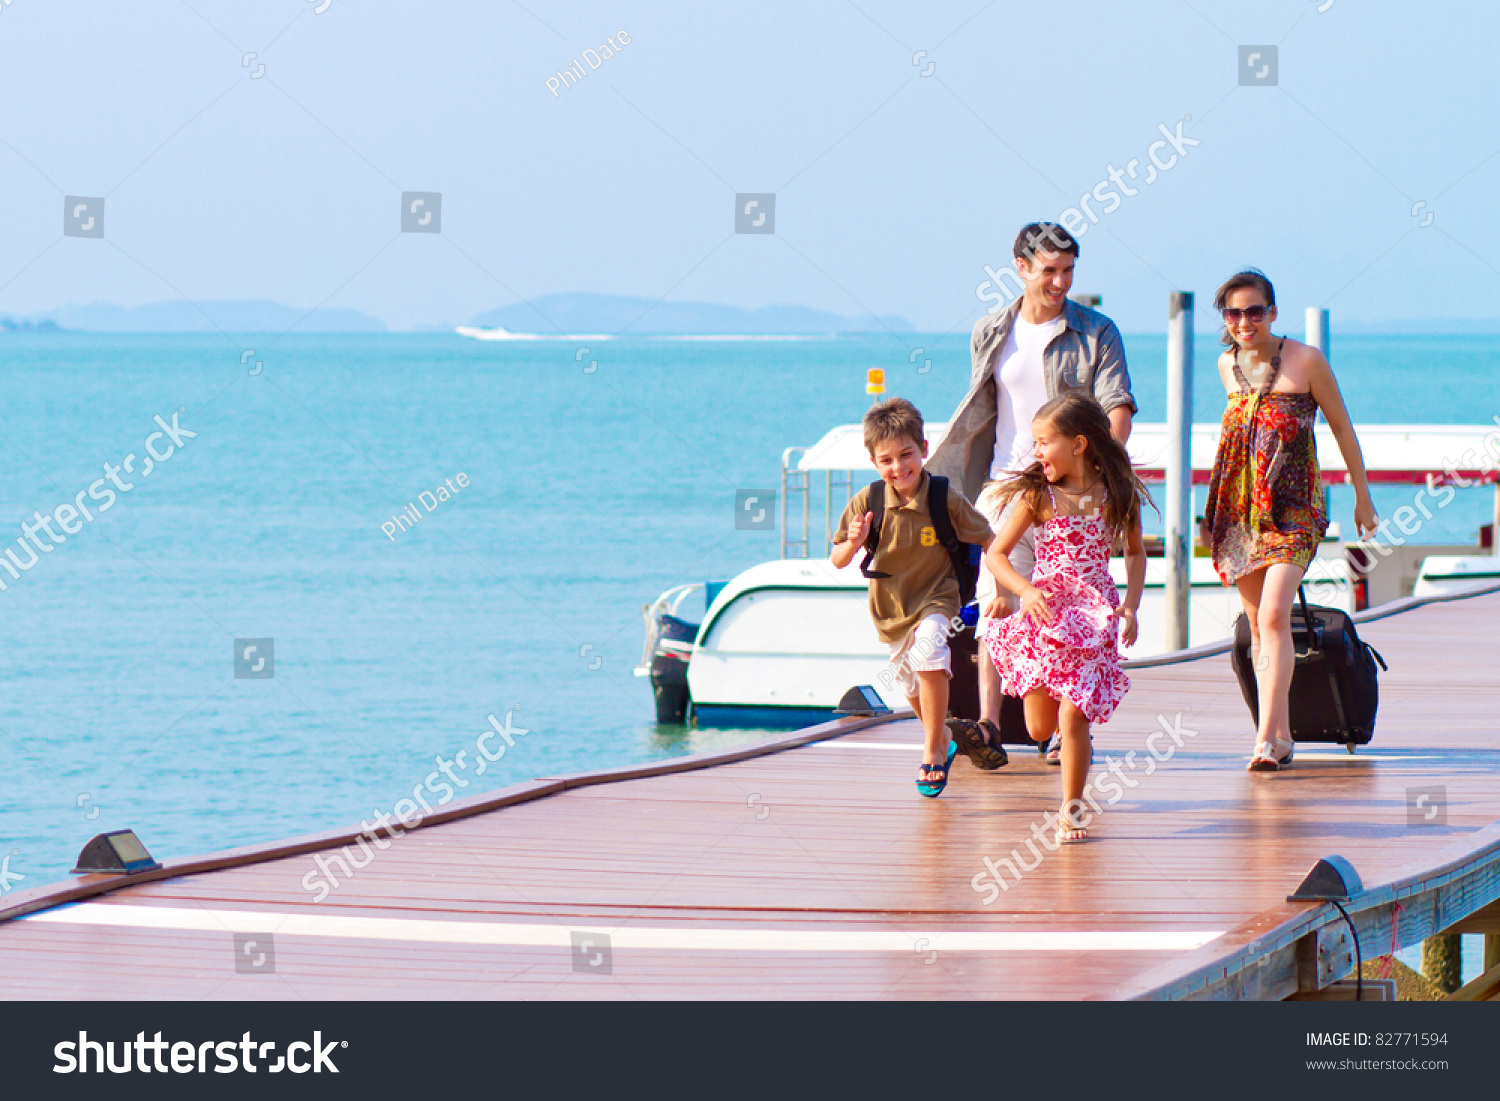 A family of 4 arriving at the resort with their luggage. #82771594